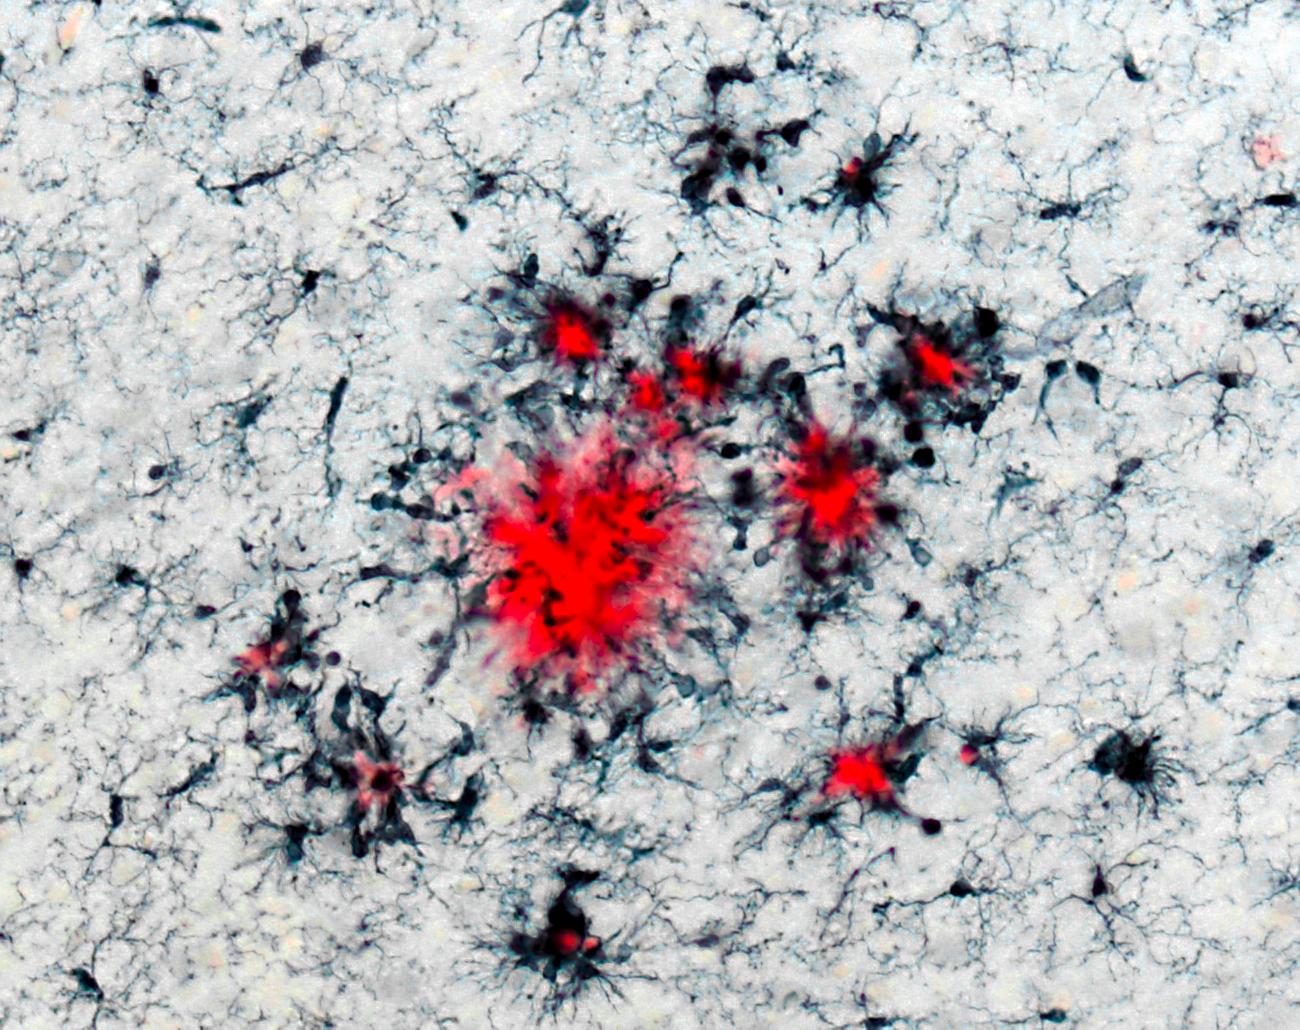 Microglia (black) accumulating around amyloid-β depositions (red) in the brain.